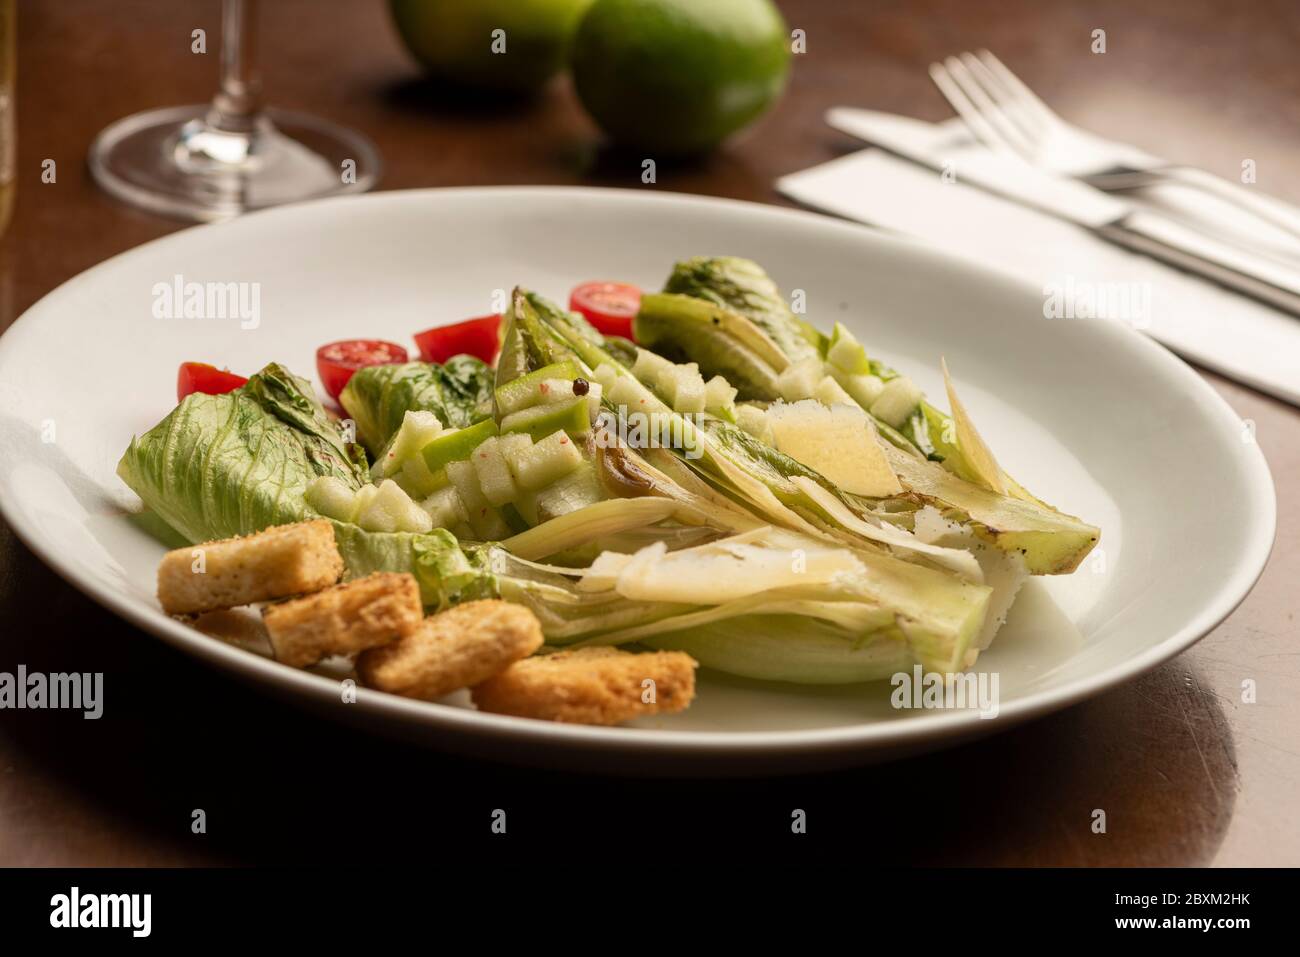 salad half cut lettuce dressing wine glass and limes on wooden table Stock Photo